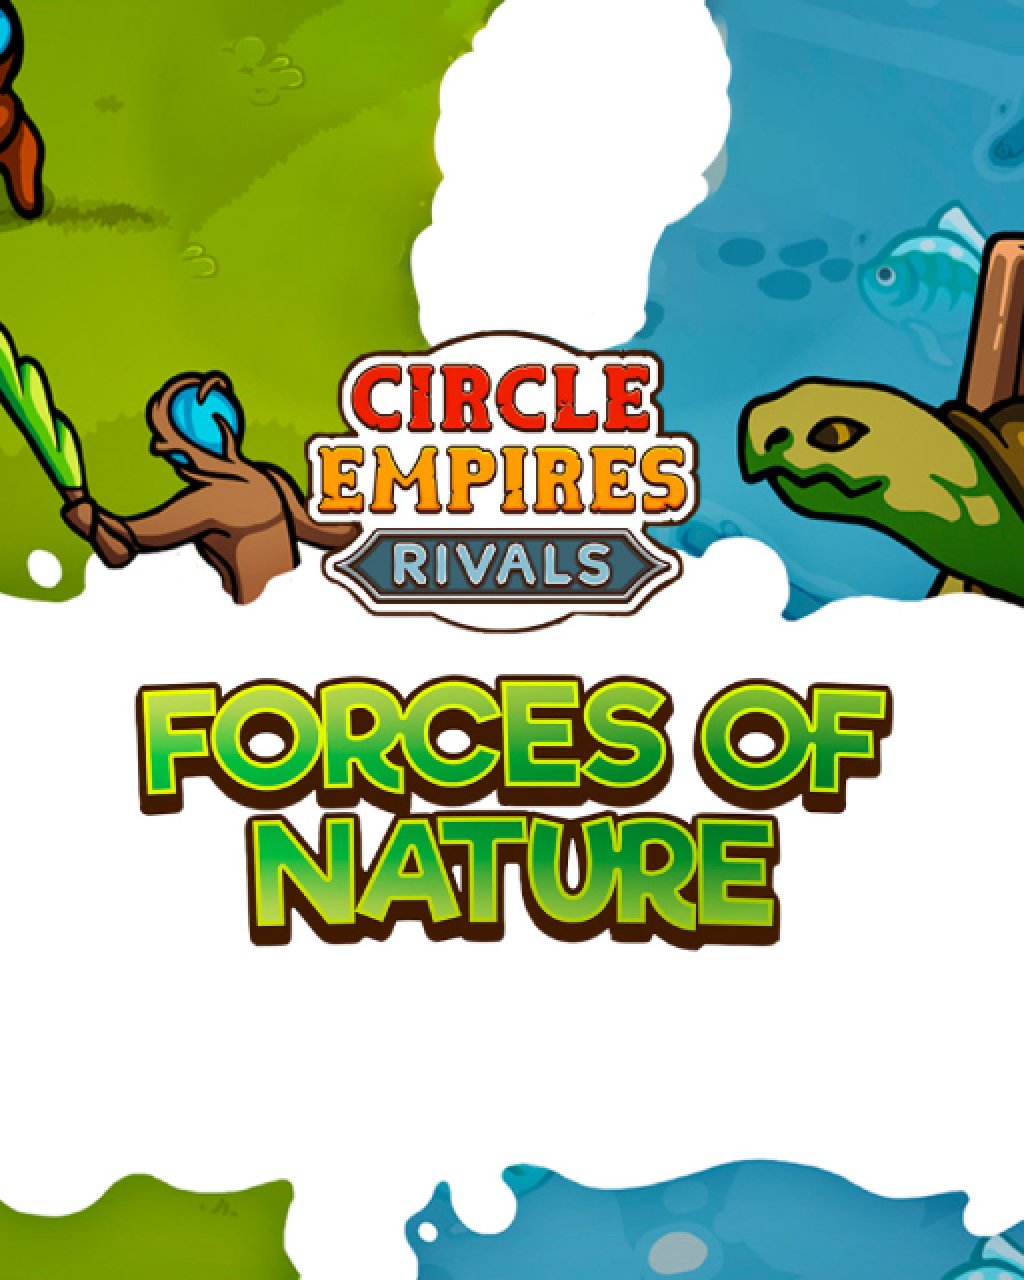 Circle Empires Rivals Forces of Nature